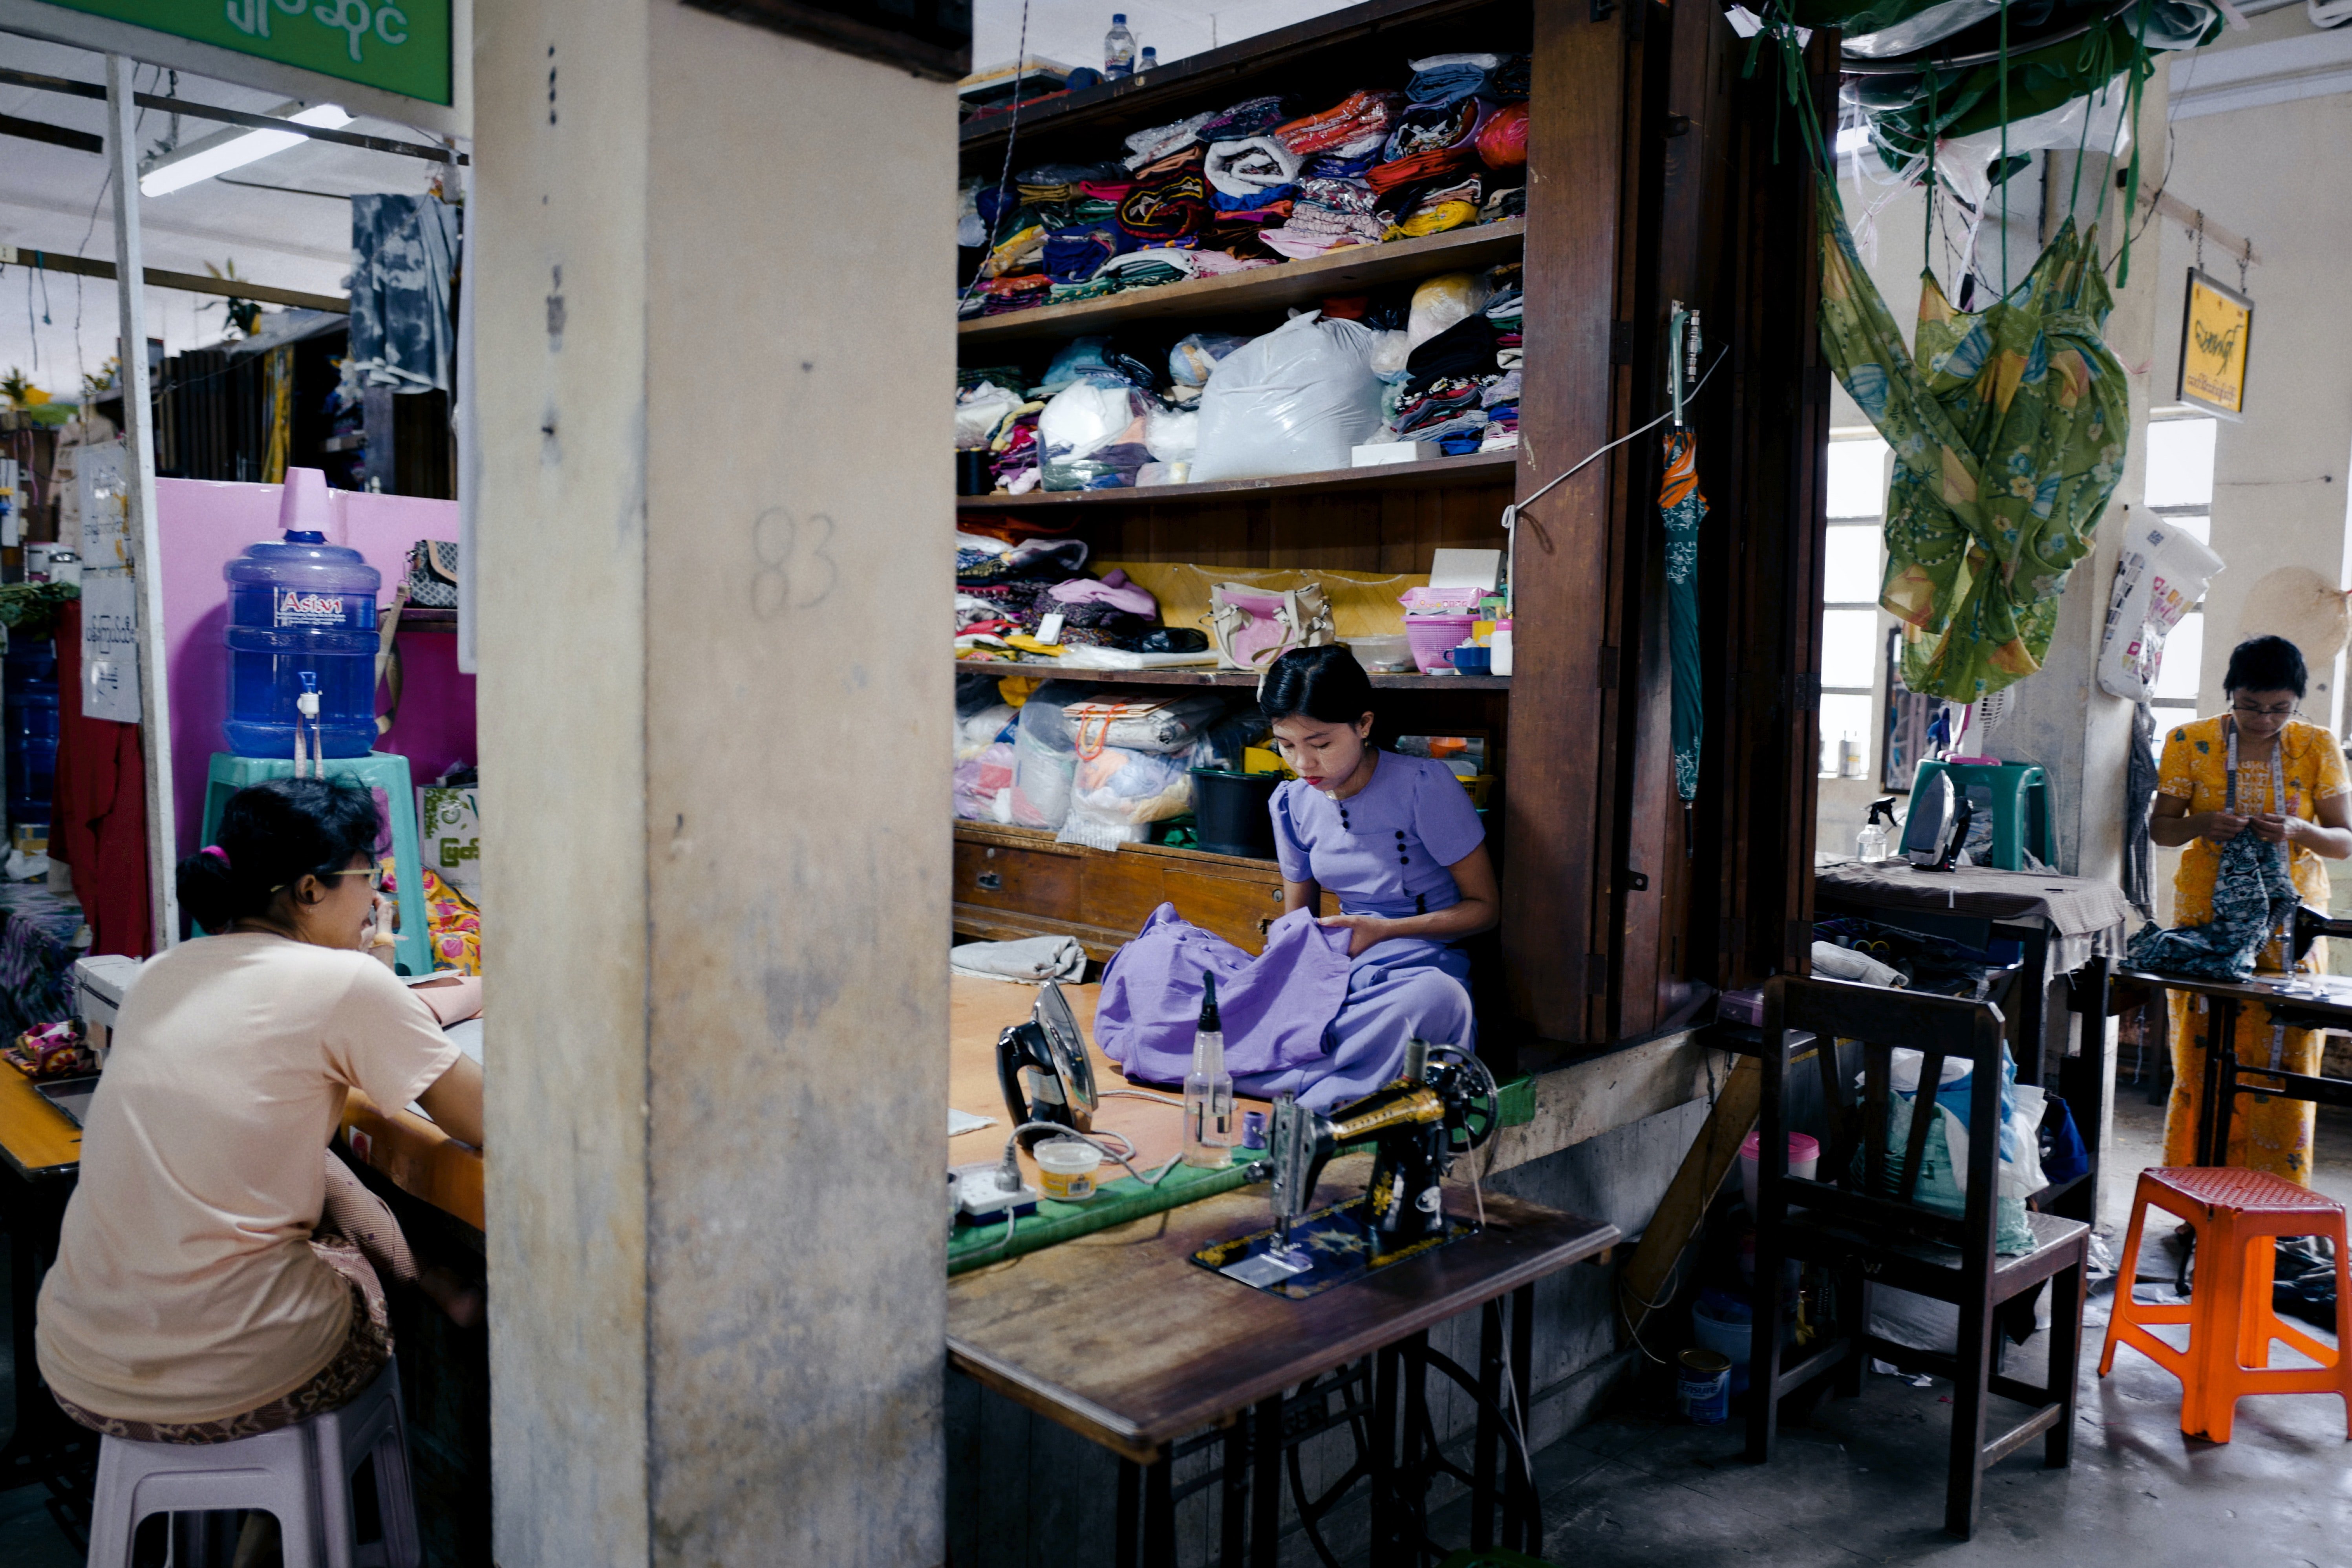 David's great-grandmother made clothes for the poor in her factories. | Source: Unsplash